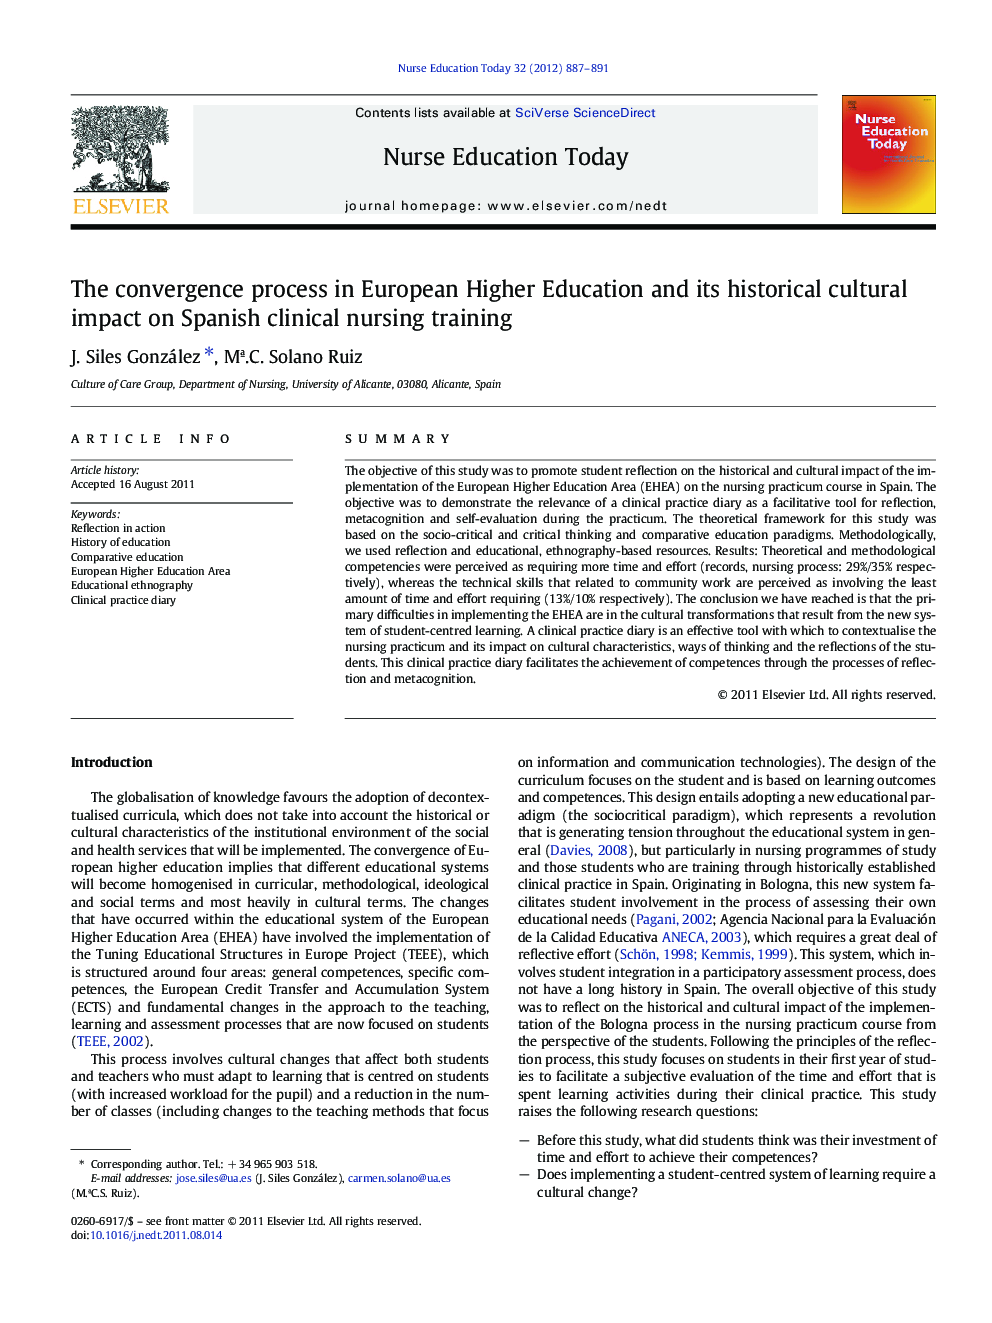 The convergence process in European Higher Education and its historical cultural impact on Spanish clinical nursing training